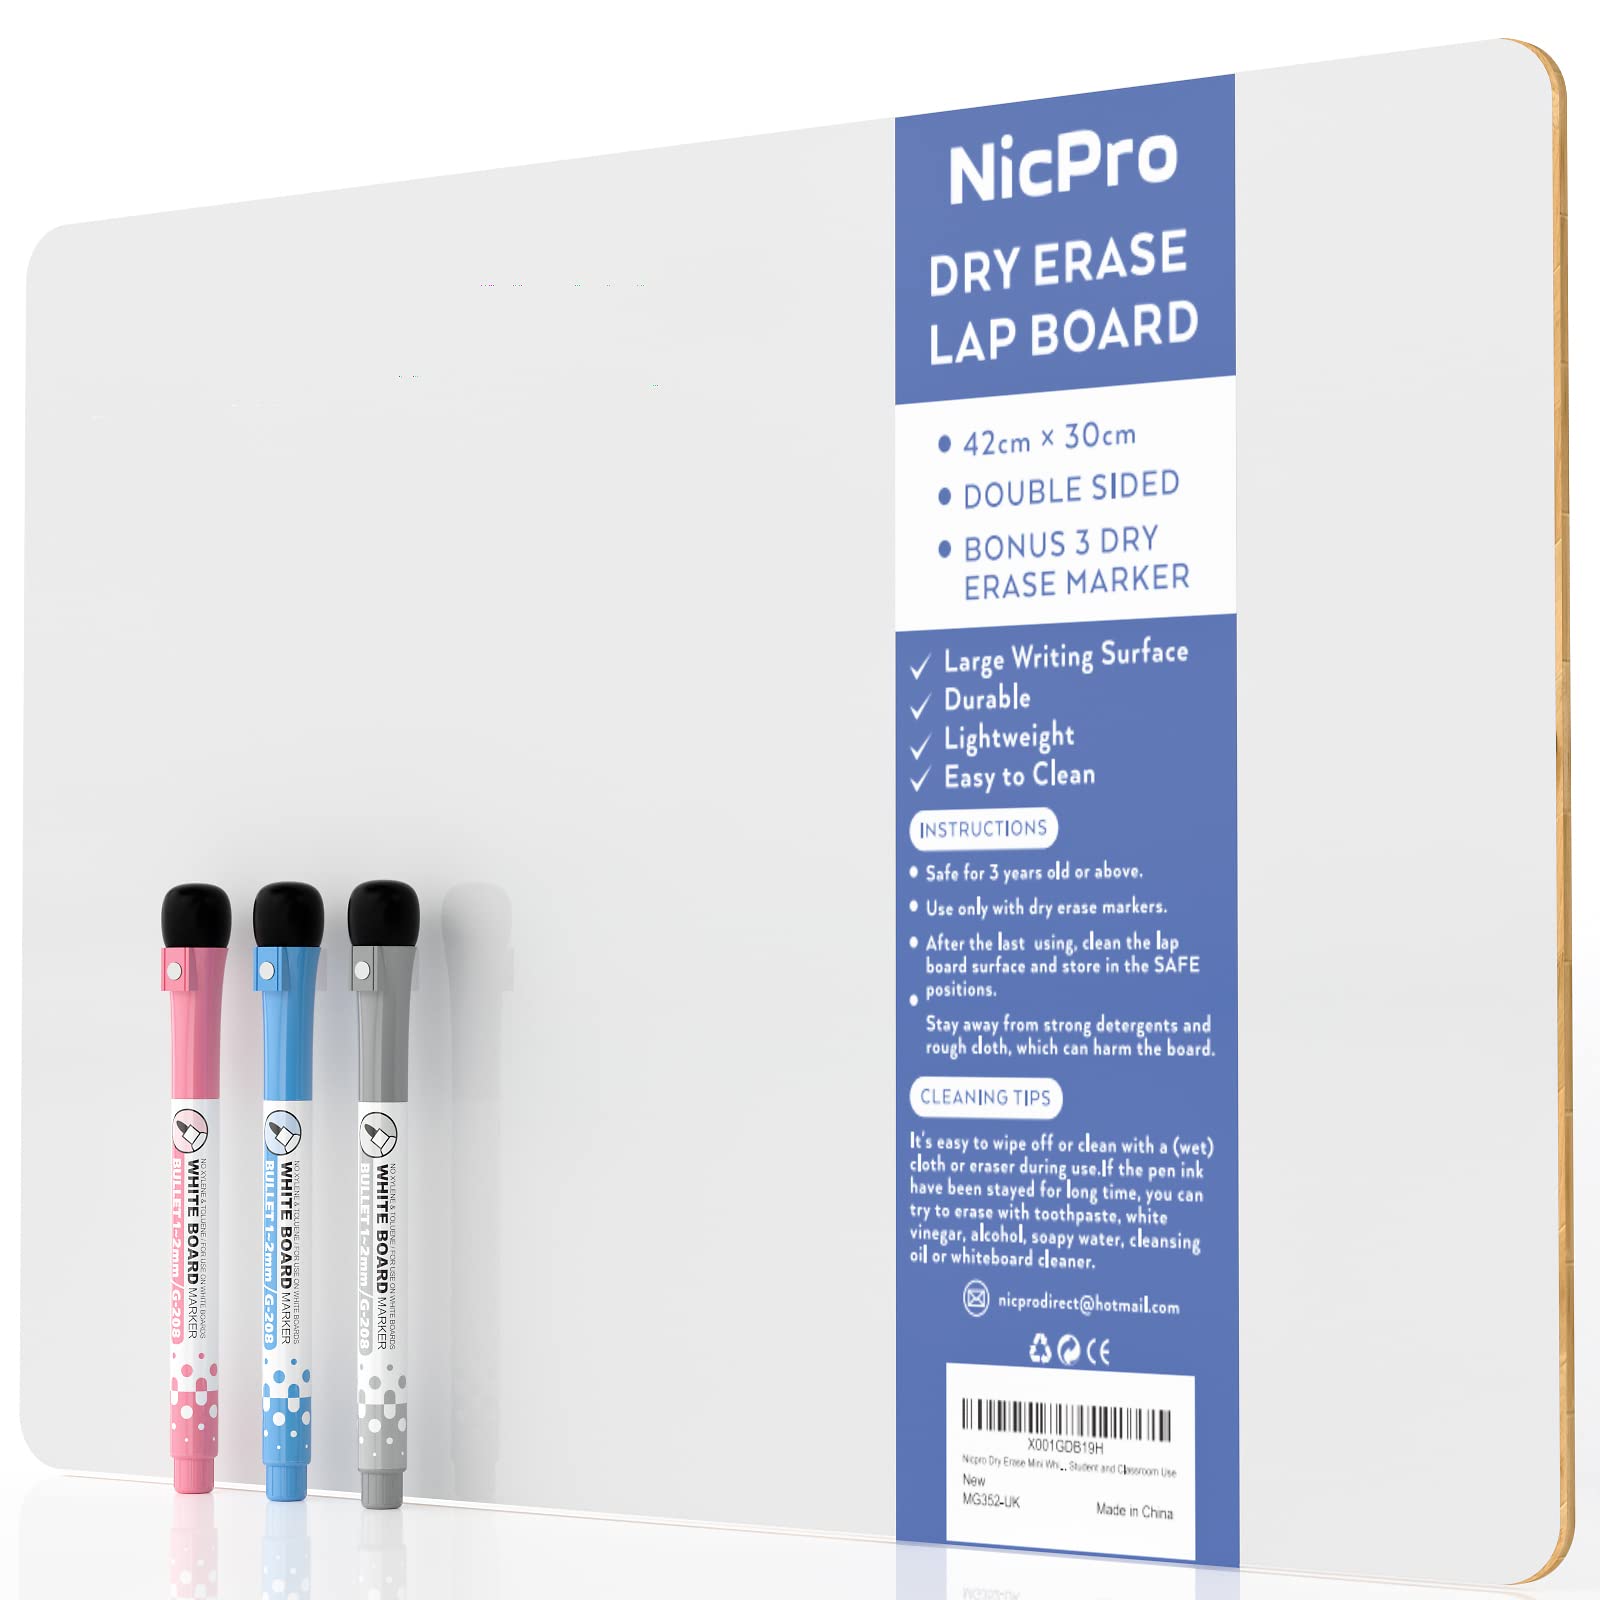 Nicpro 12 x 16 inches Lapboard Small Dry Erase Lap Board Double Sided with 3 Water-Based Pens Learning Mini Whiteboard Portable for Kid Student and Classroom Use